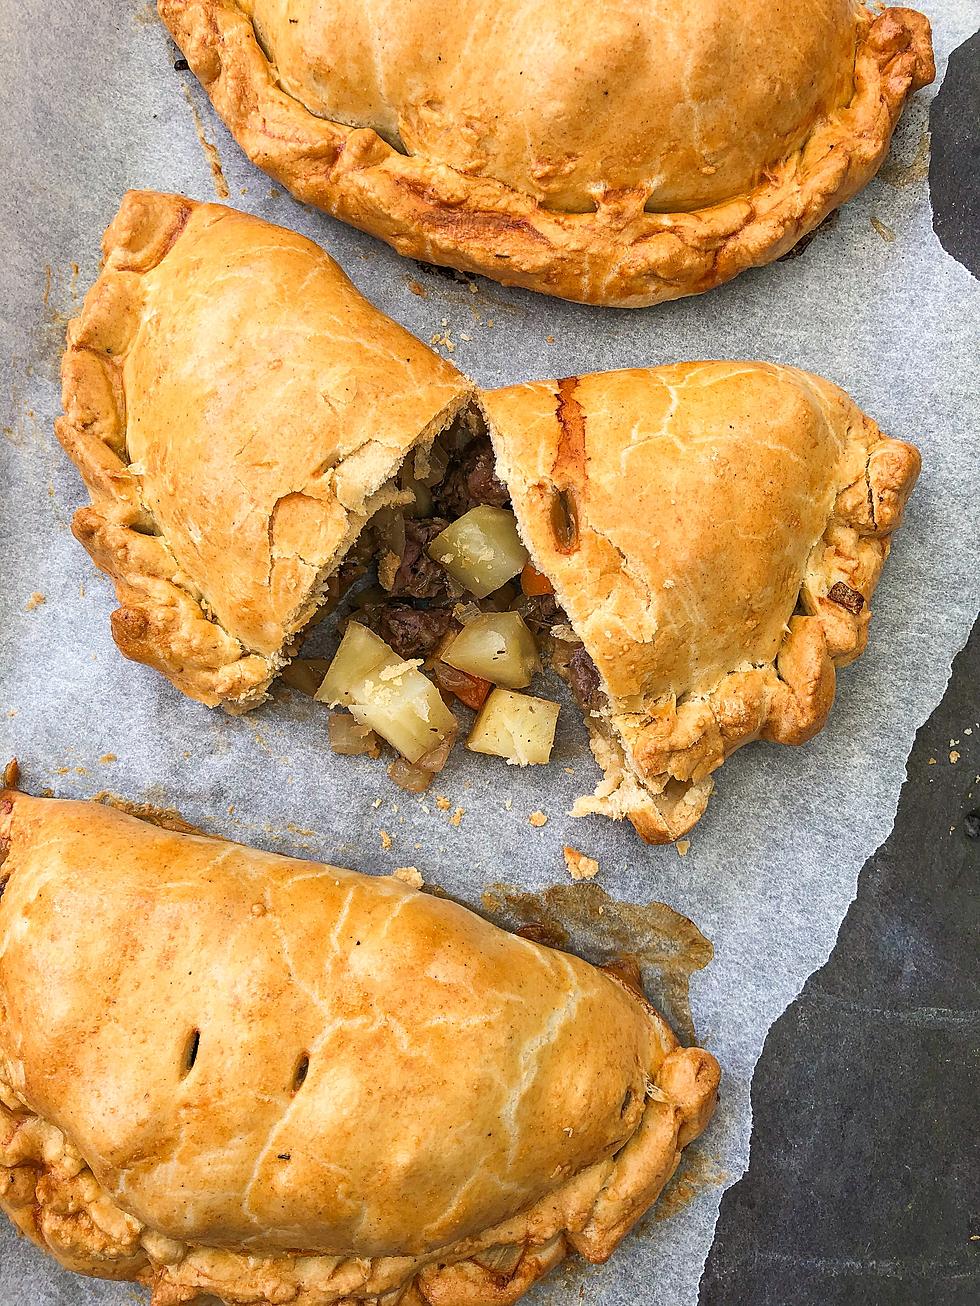 Here's Where to Get Your Pasty Fix Near Kalamazoo